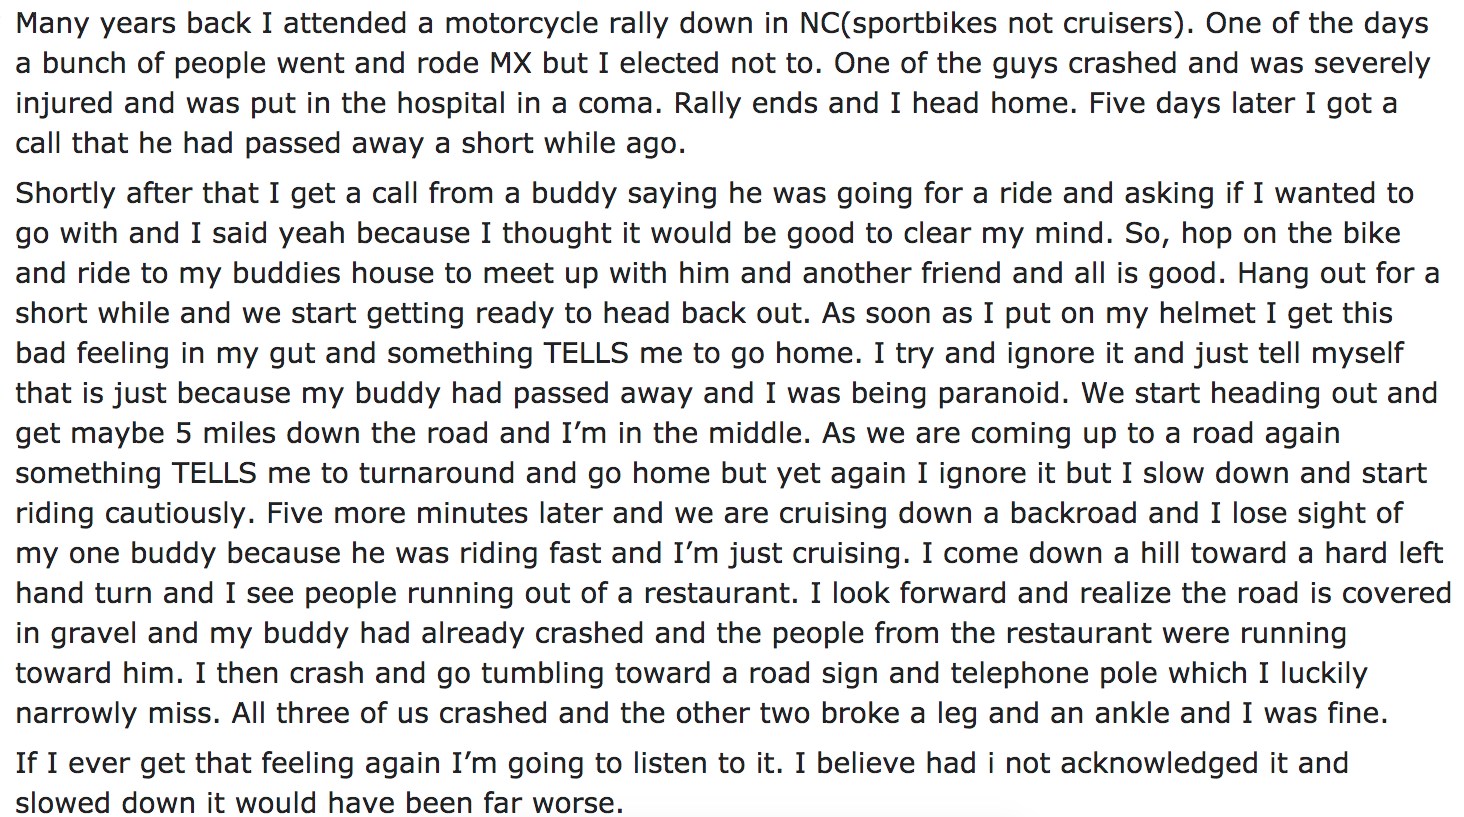 Ask Reddit - Many years back I attended a motorcycle rally down in Ncsportbikes not cruisers. One of the days a bunch of people went and rode Mx but I elected not to. One of the guys crashed and was severely injured and was put in the hospital in a coma.